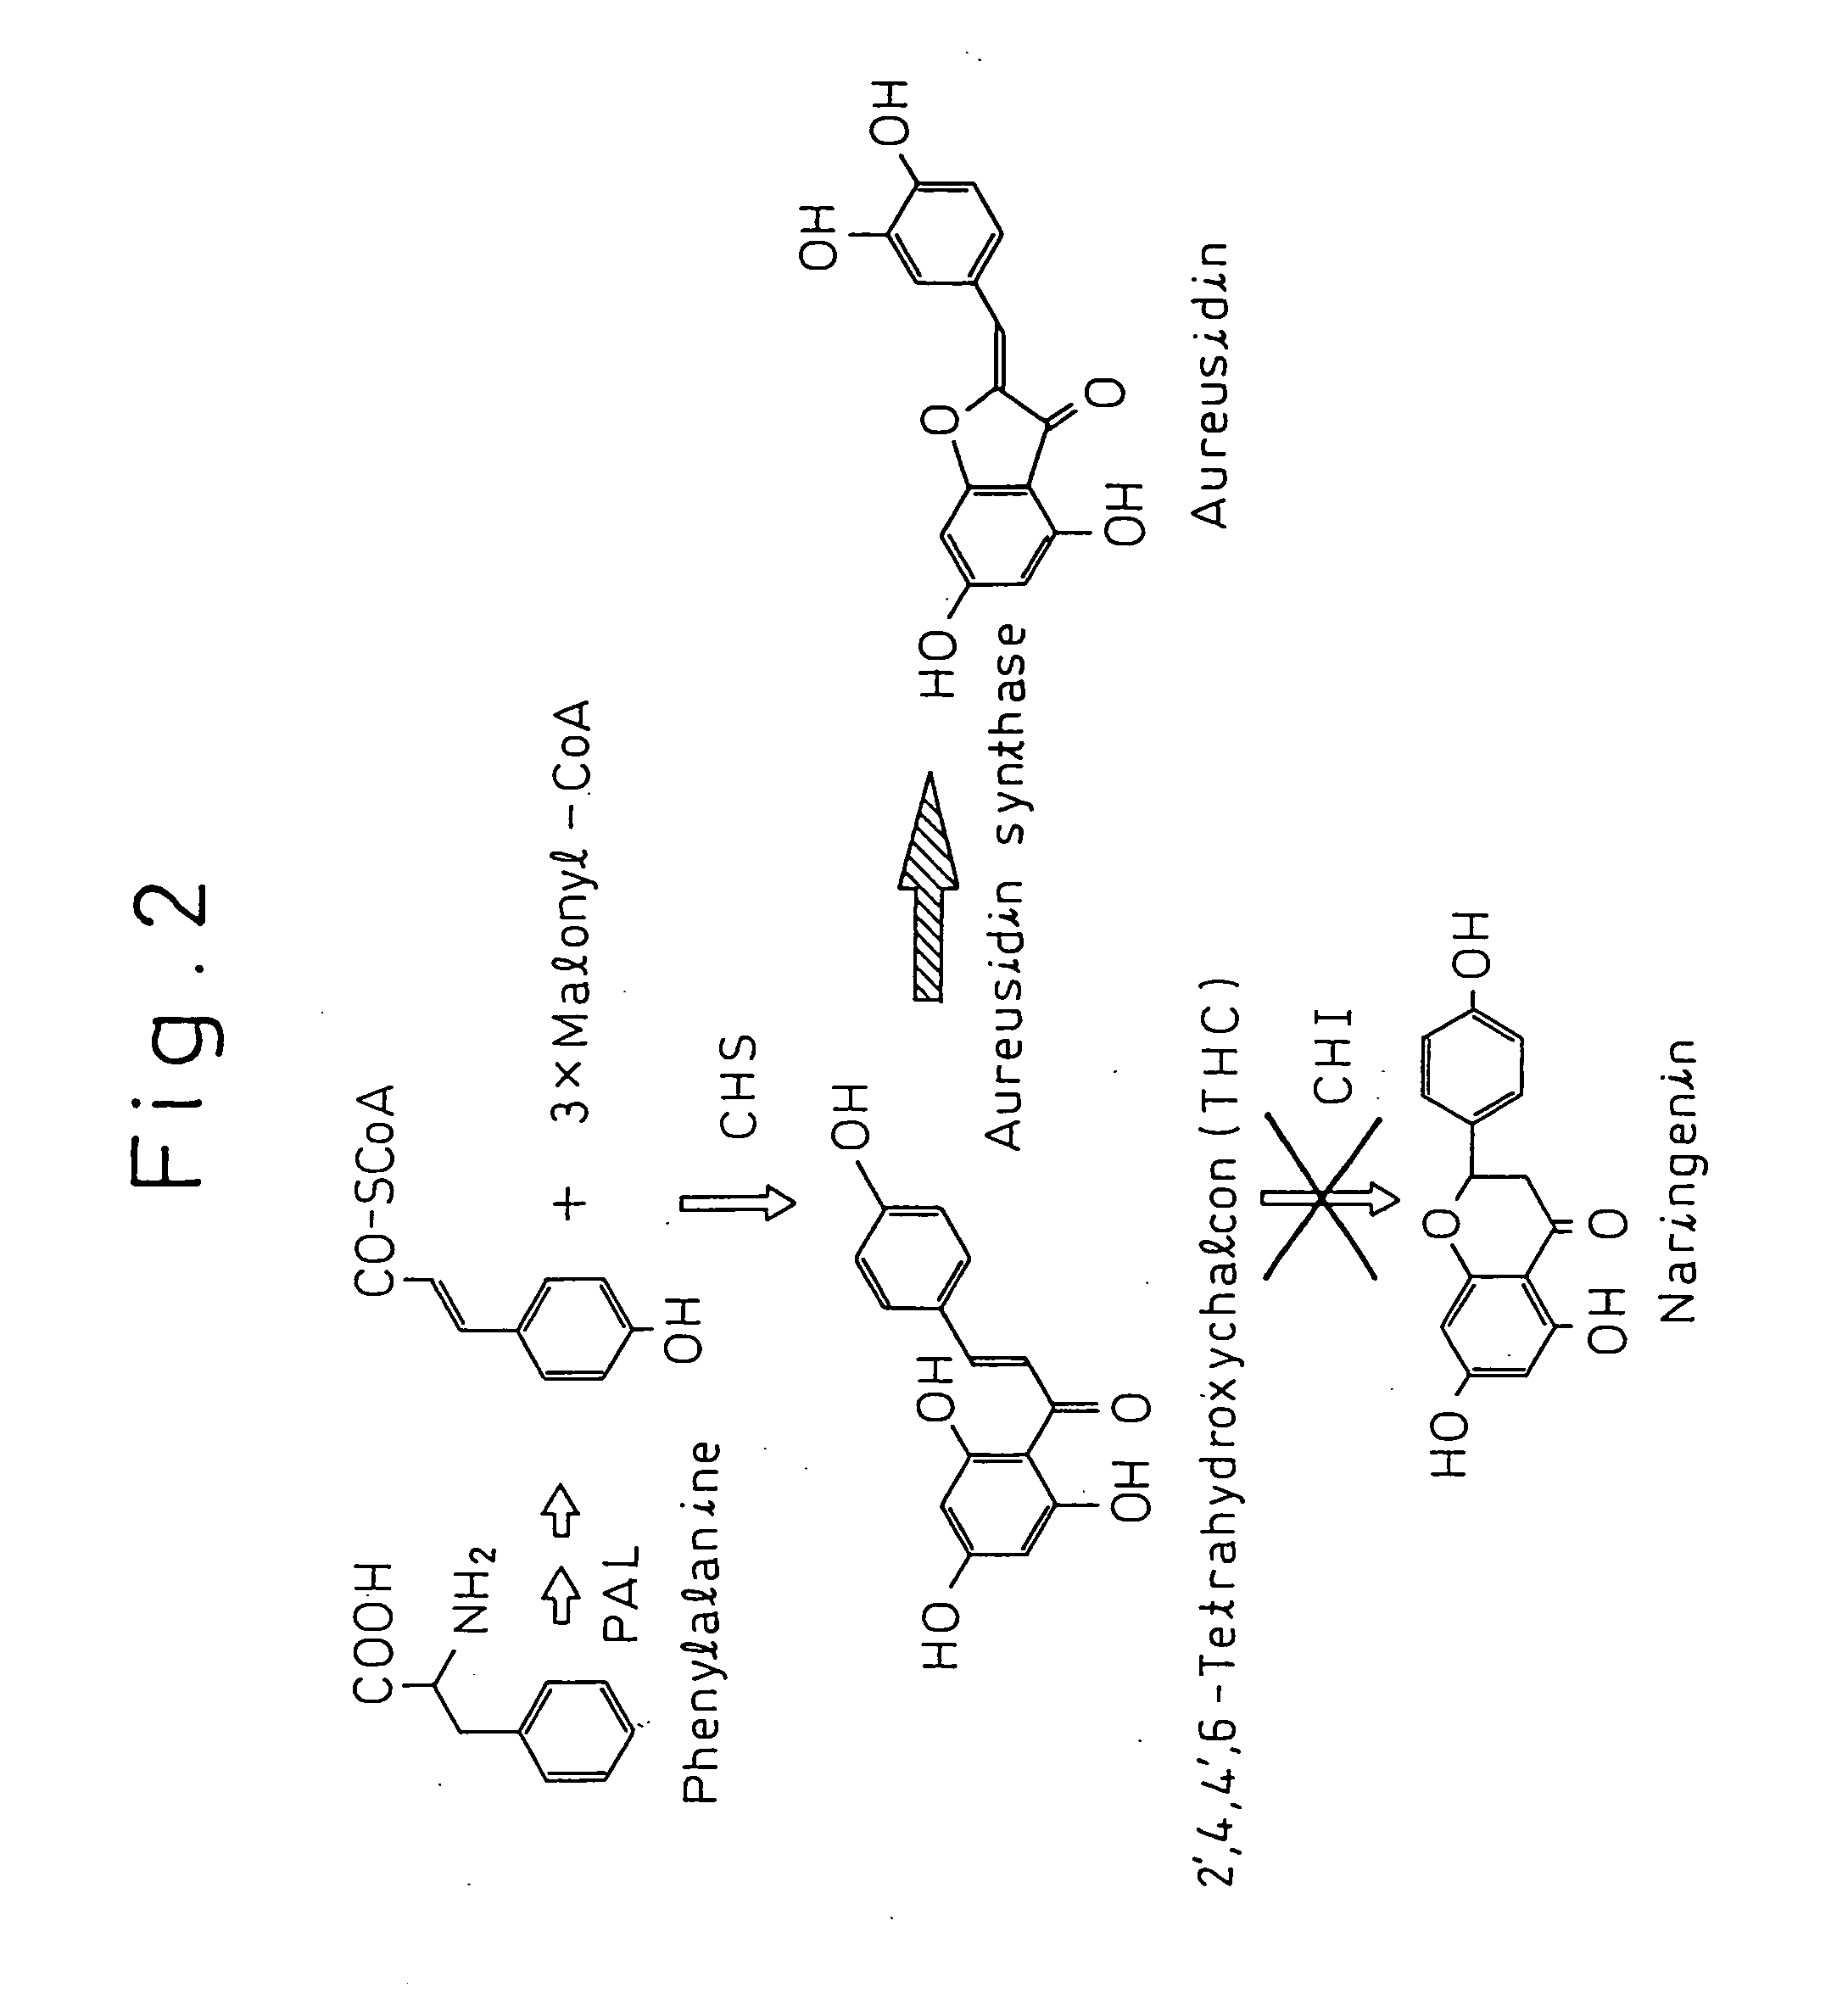 Gene encoding a protein having aurone synthesis activity